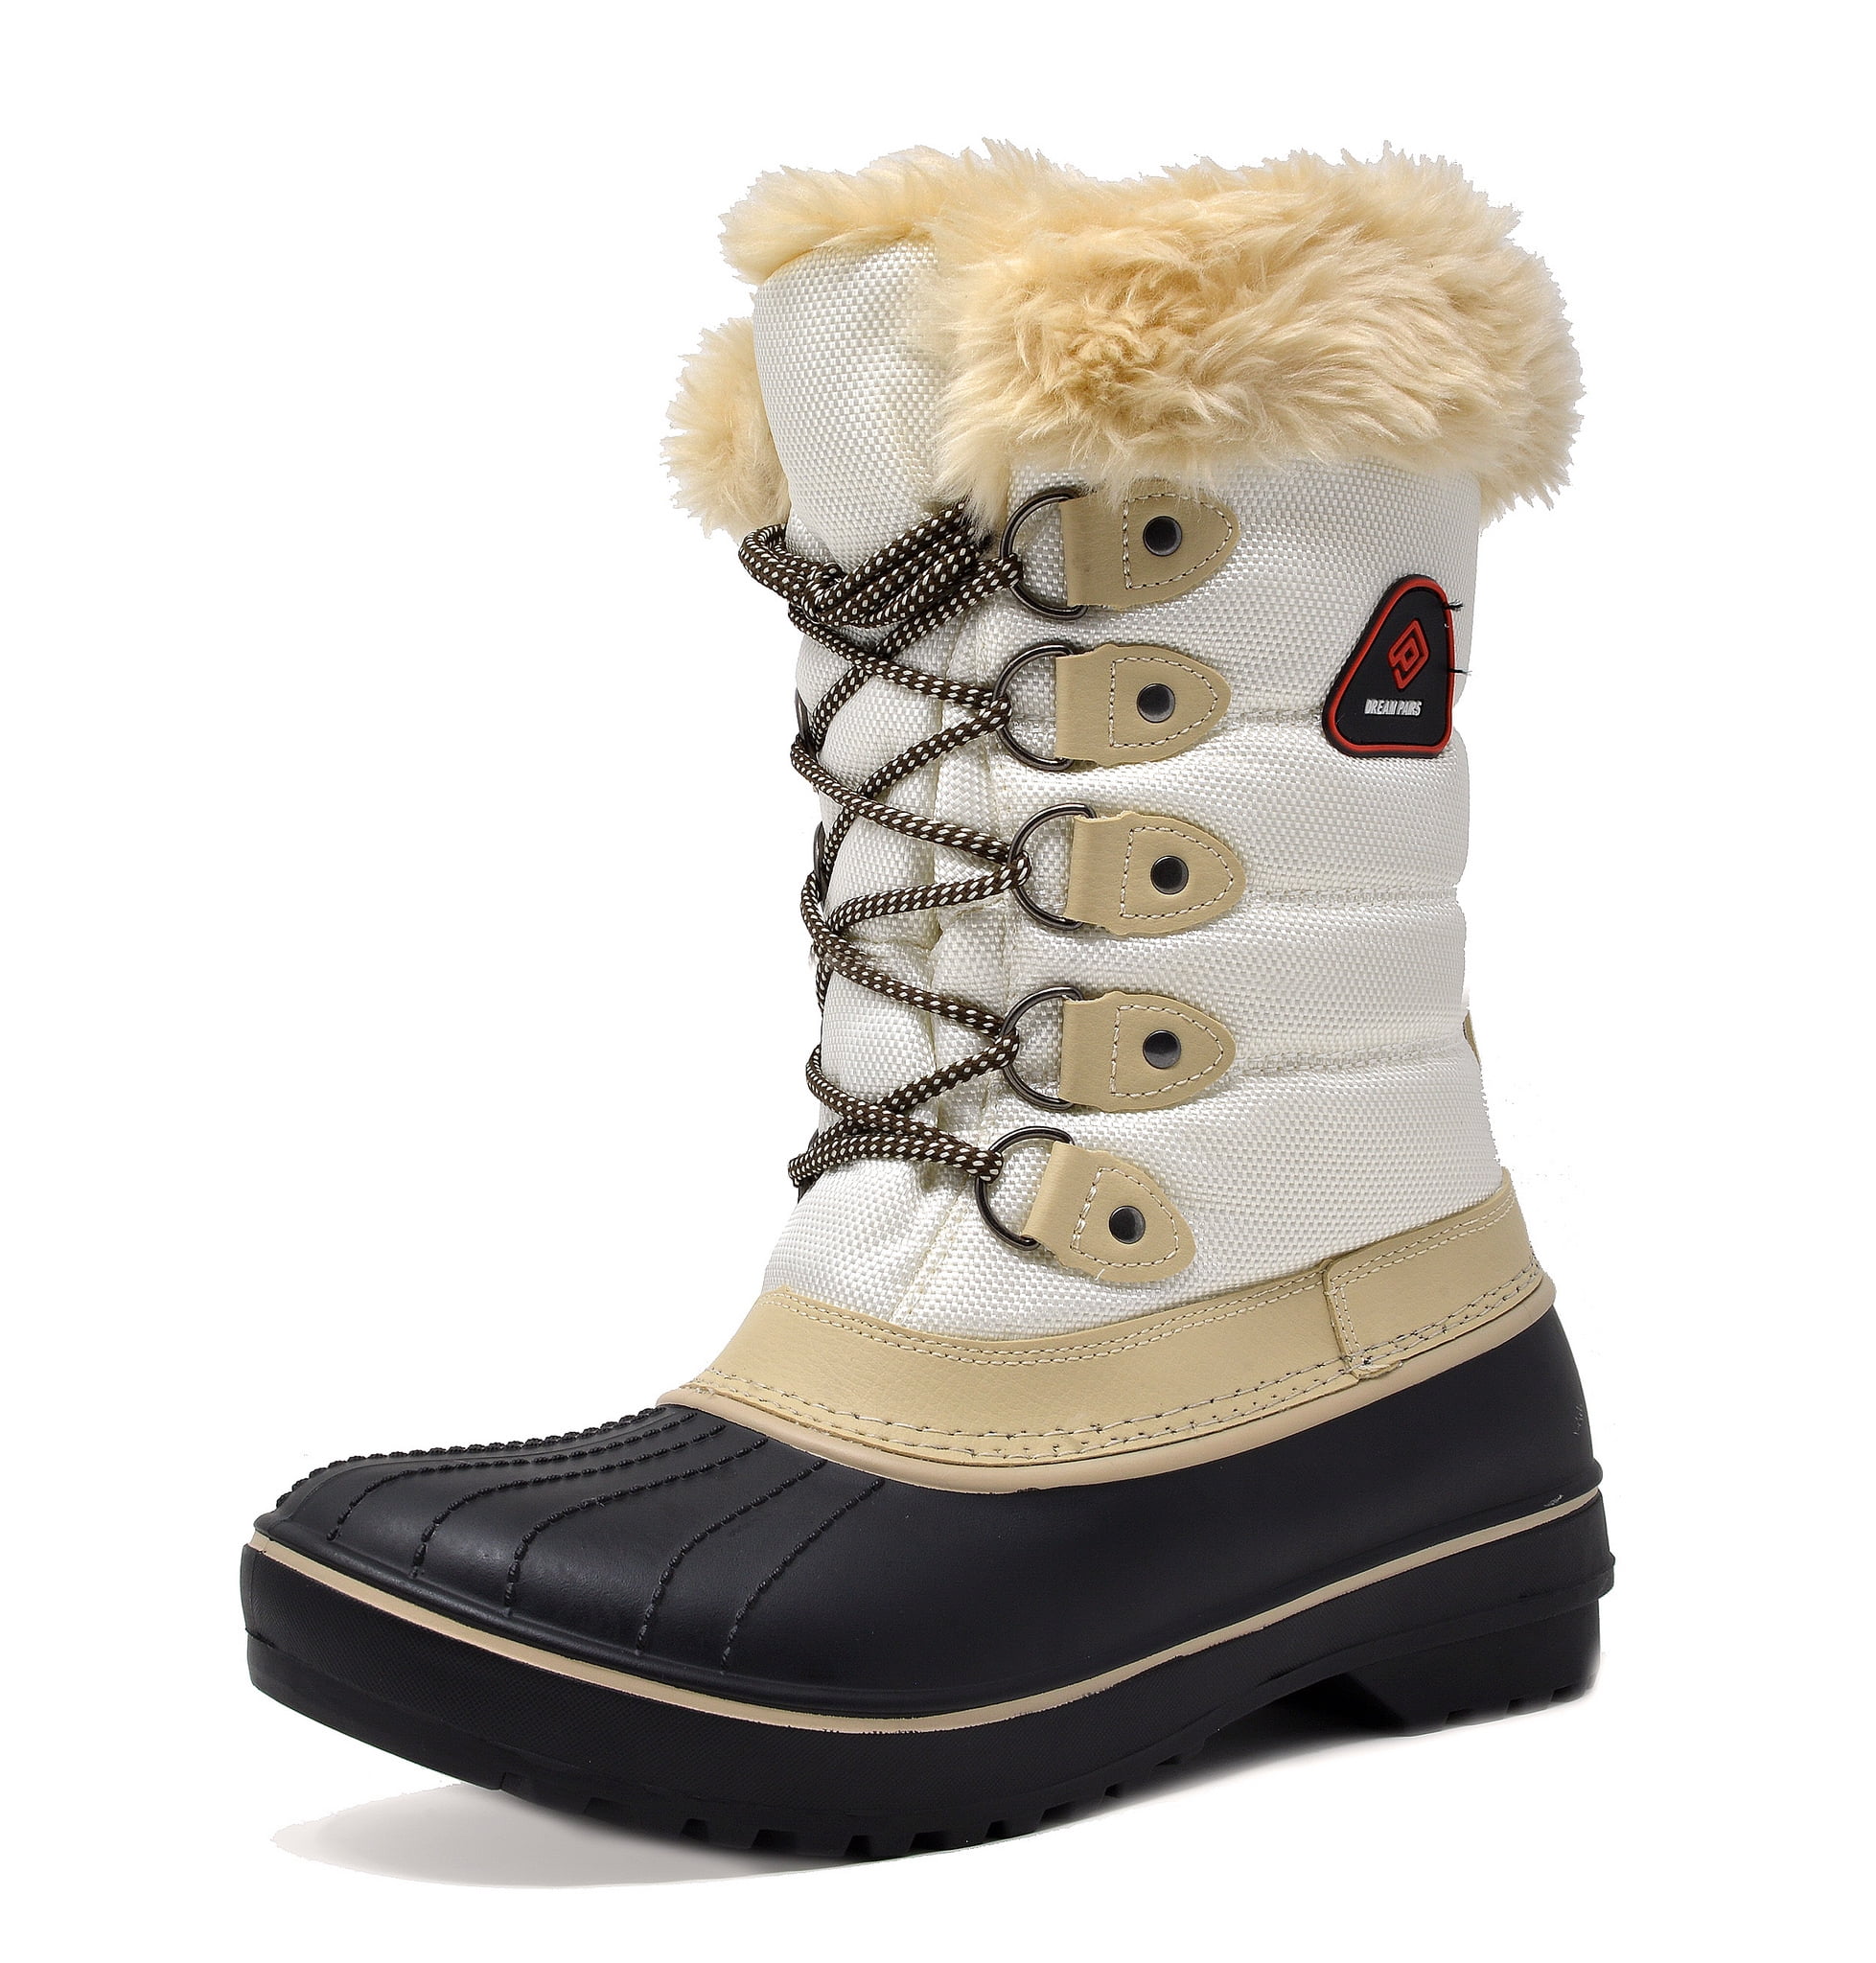 Women's Winter Waterproof Snow Boots Faux Fur Lined Warm Insulated Mid Calf 